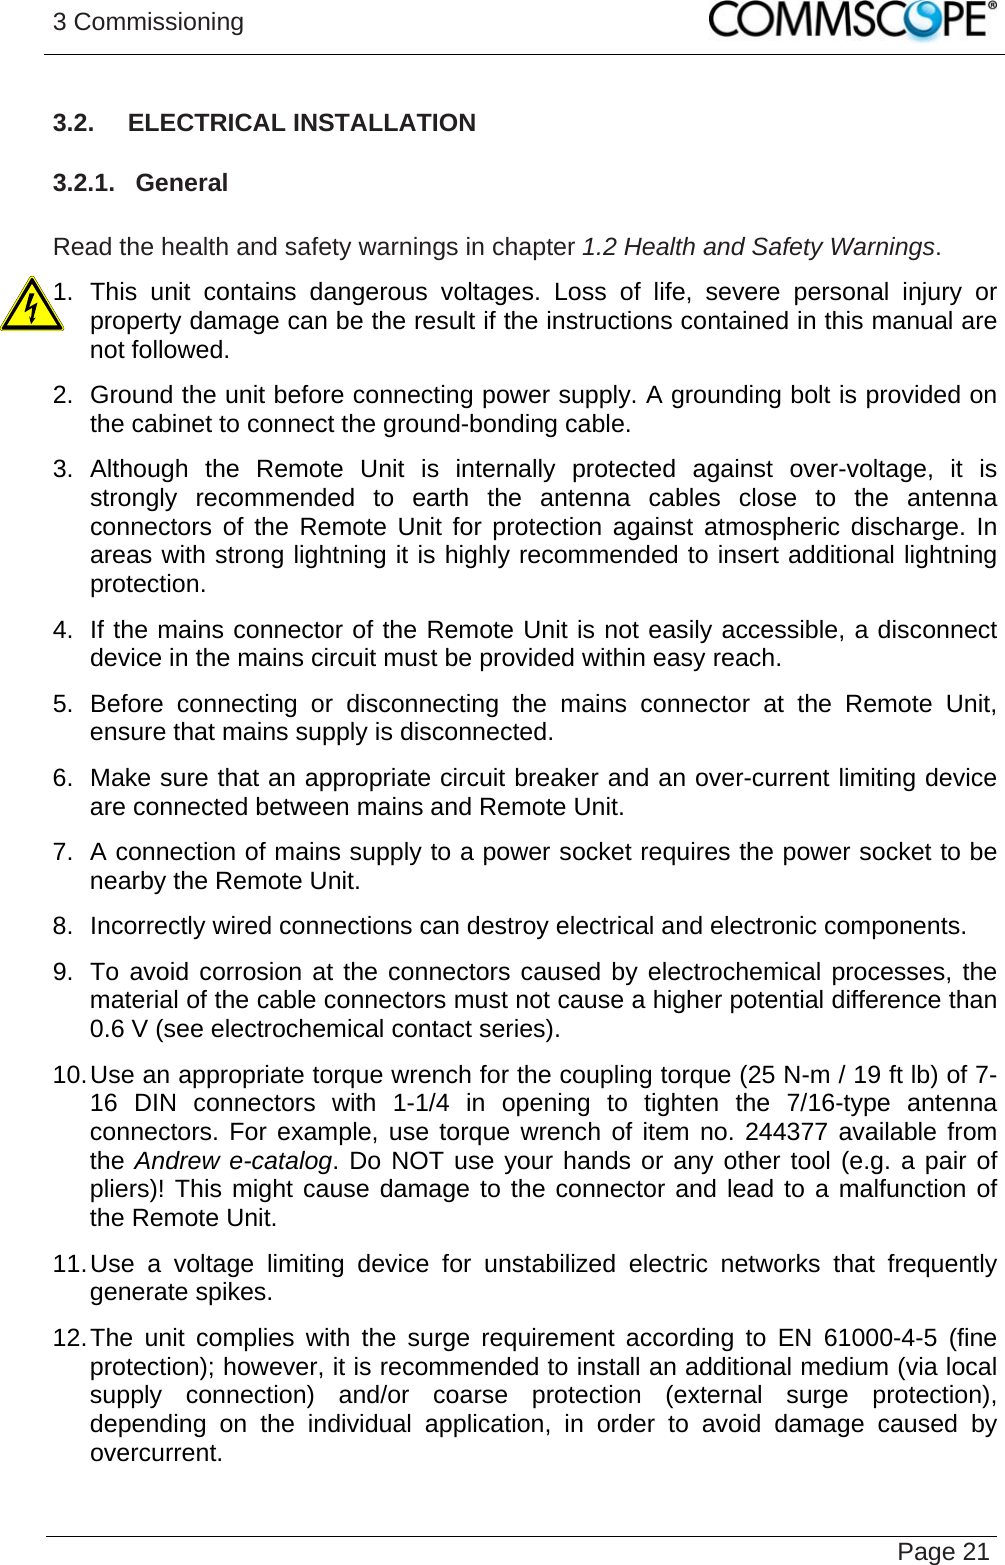 3 Commissioning   Page 213.2.  ELECTRICAL INSTALLATION 3.2.1.  General  Read the health and safety warnings in chapter 1.2 Health and Safety Warnings. 1. This unit contains dangerous voltages. Loss of life, severe personal injury or property damage can be the result if the instructions contained in this manual are not followed. 2.  Ground the unit before connecting power supply. A grounding bolt is provided on the cabinet to connect the ground-bonding cable. 3. Although the Remote Unit is internally protected against over-voltage, it is strongly recommended to earth the antenna cables close to the antenna connectors of the Remote Unit for protection against atmospheric discharge. In areas with strong lightning it is highly recommended to insert additional lightning protection. 4.  If the mains connector of the Remote Unit is not easily accessible, a disconnect device in the mains circuit must be provided within easy reach. 5. Before connecting or disconnecting the mains connector at the Remote Unit, ensure that mains supply is disconnected. 6.  Make sure that an appropriate circuit breaker and an over-current limiting device are connected between mains and Remote Unit. 7.  A connection of mains supply to a power socket requires the power socket to be nearby the Remote Unit. 8.  Incorrectly wired connections can destroy electrical and electronic components. 9.  To avoid corrosion at the connectors caused by electrochemical processes, the material of the cable connectors must not cause a higher potential difference than 0.6 V (see electrochemical contact series). 10. Use an appropriate torque wrench for the coupling torque (25 N-m / 19 ft lb) of 7-16 DIN connectors with 1-1/4 in opening to tighten the 7/16-type antenna connectors. For example, use torque wrench of item no. 244377 available from the Andrew e-catalog. Do NOT use your hands or any other tool (e.g. a pair of pliers)! This might cause damage to the connector and lead to a malfunction of the Remote Unit. 11. Use a voltage limiting device for unstabilized electric networks that frequently generate spikes.  12. The unit complies with the surge requirement according to EN 61000-4-5 (fine protection); however, it is recommended to install an additional medium (via local supply connection) and/or coarse protection (external surge protection), depending on the individual application, in order to avoid damage caused by overcurrent.  